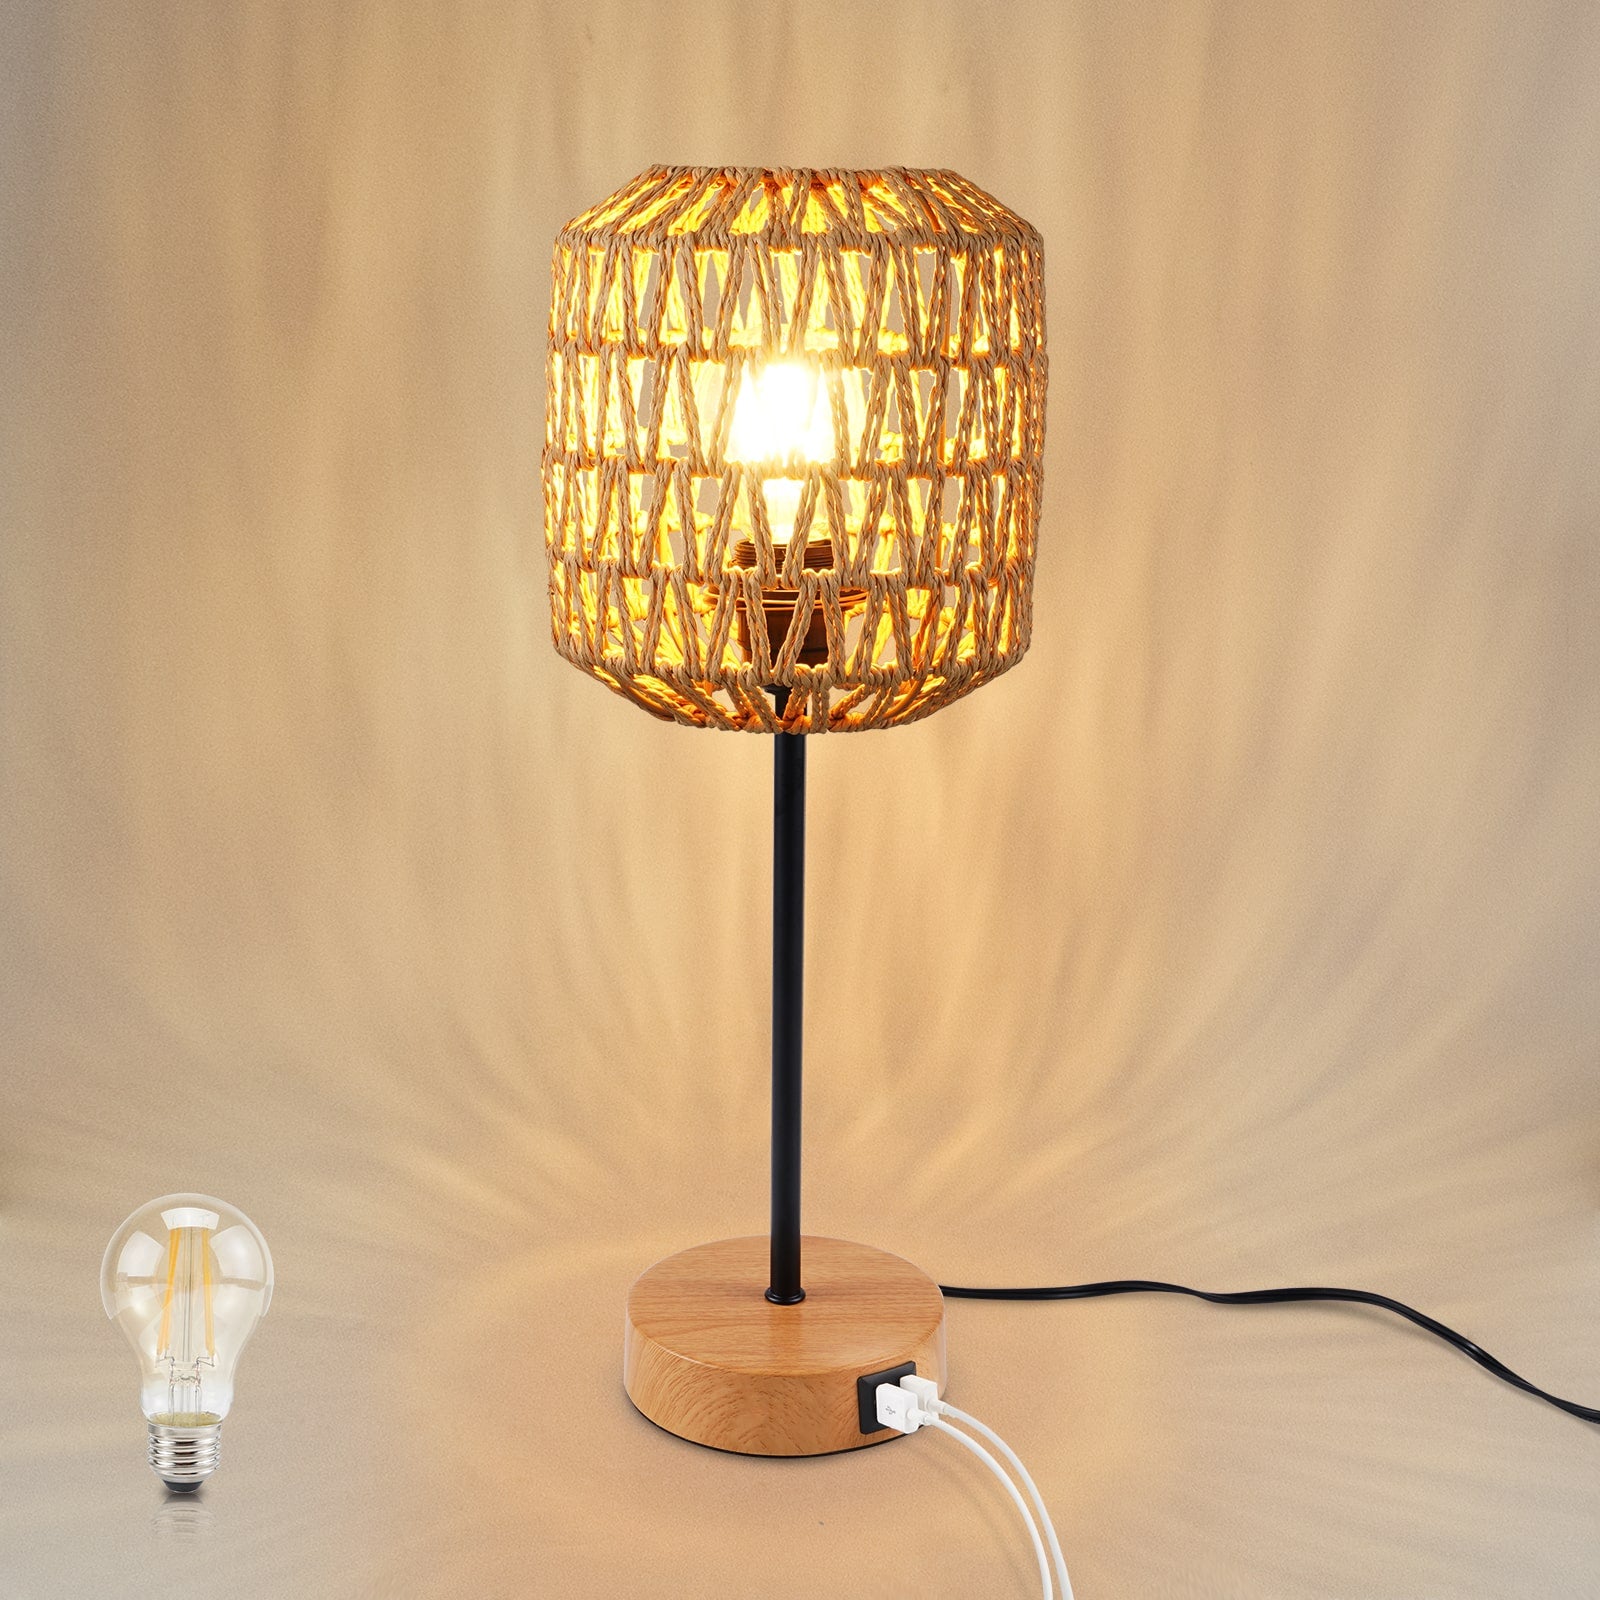 N02 Vintage Rattan Natural Table Lamp Touch Control with USB Port